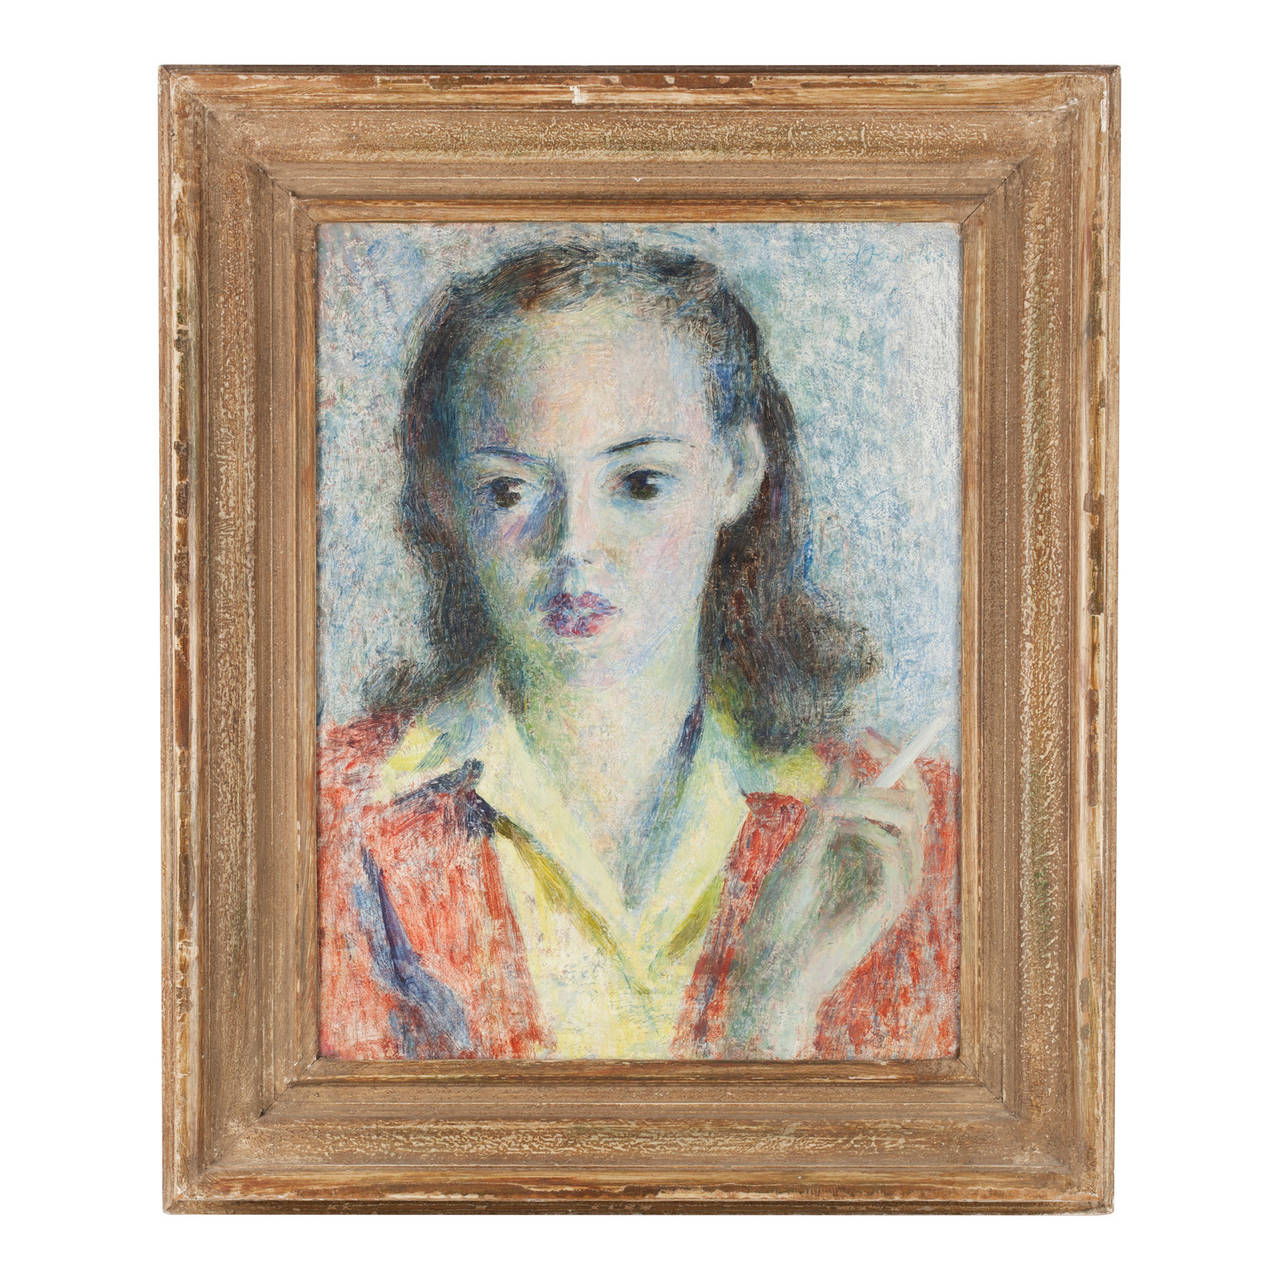 Girl with a cigarette, 1951

1951 Exhibited at the Royal Academy, London, No. 632 
 ‘The Royal Academy Illustrated’ 1951 p. 44

Original frame with labels verso:
James Bourlet & Sons Ltd. Orion Gallery Label.

Signed upper right.